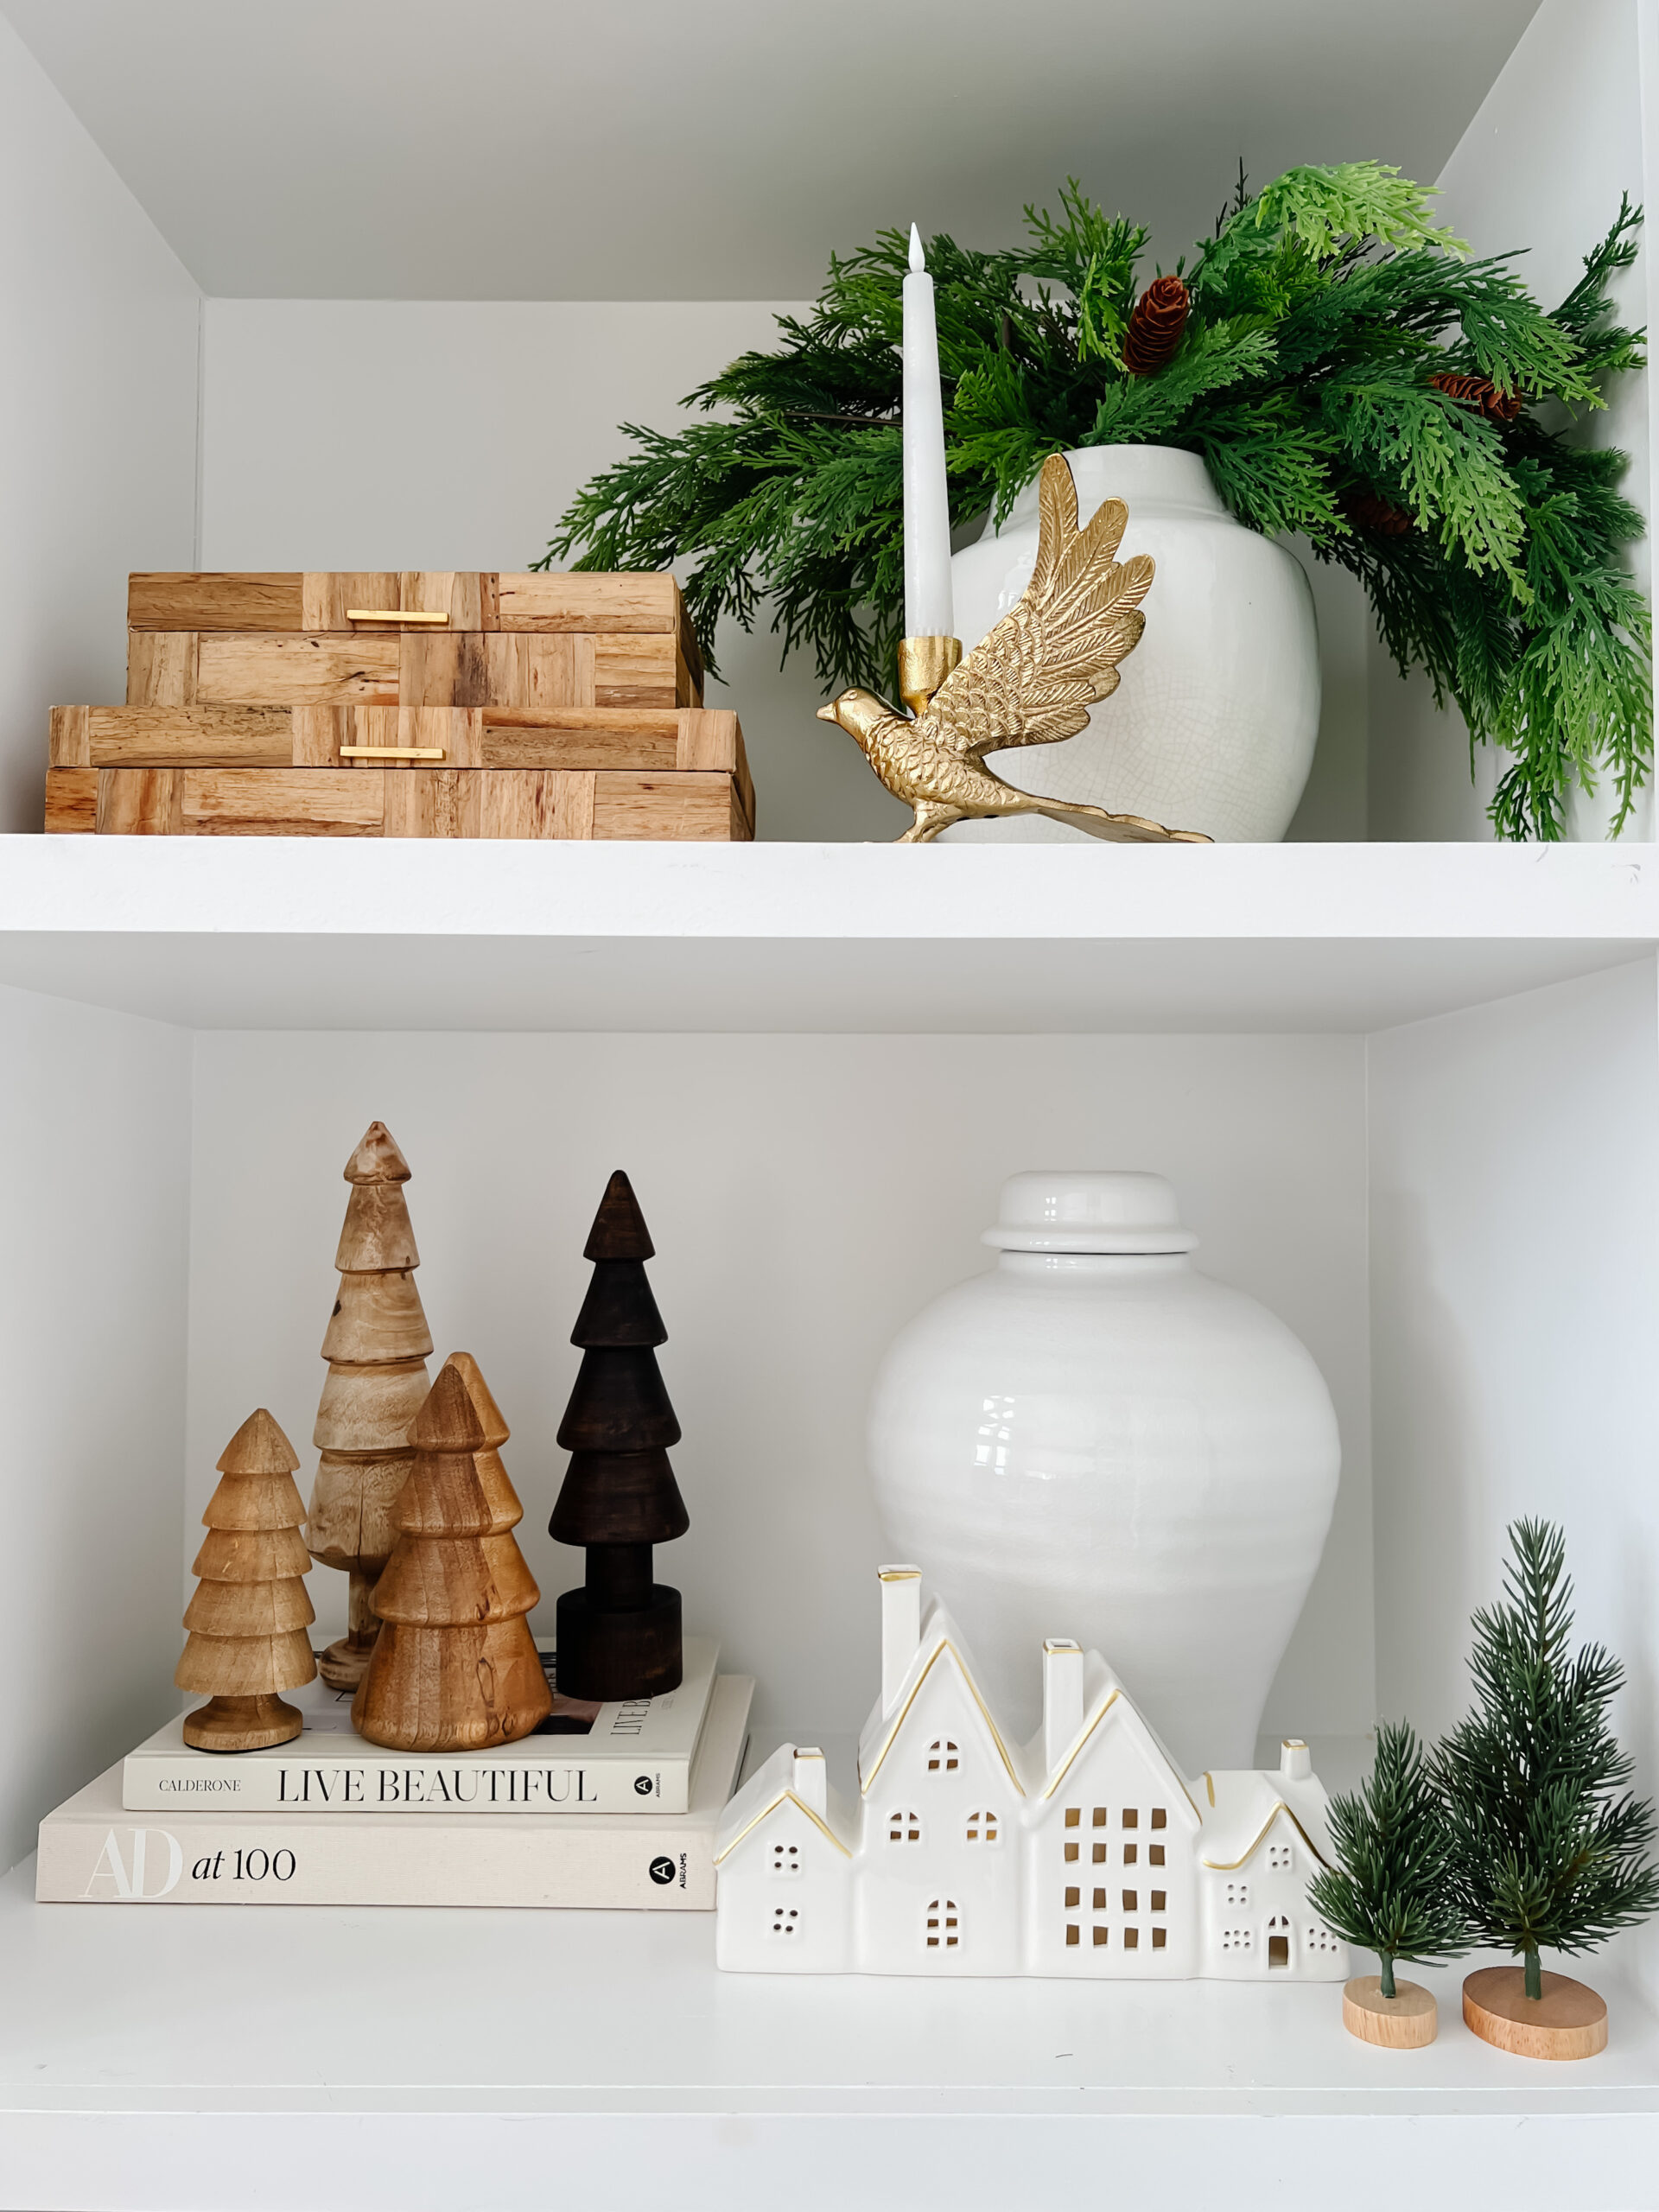 HOLIDAY DECOR FINDS FROM MICHAELS